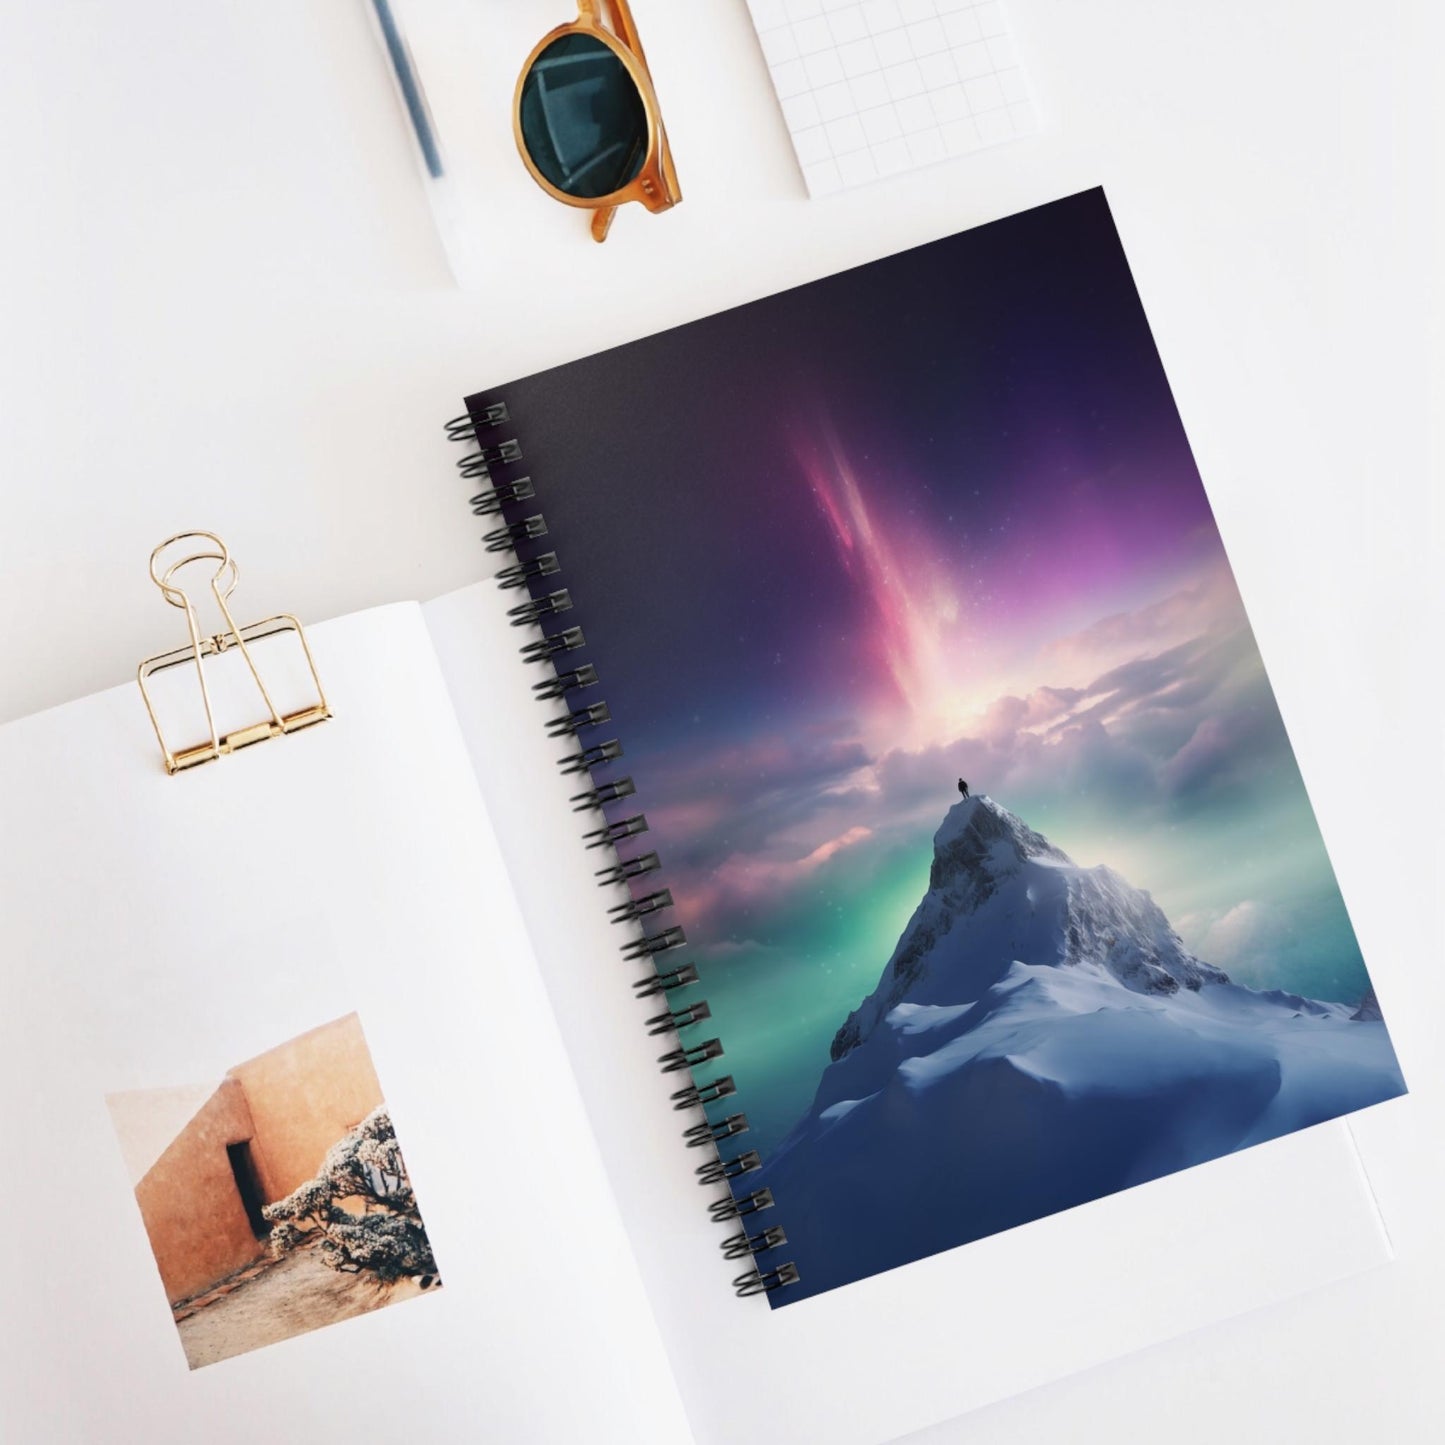 Unique Aurora Borealis Spiral Notebook Ruled Line - Personalized Northern Light View - Stationary Accessories - Perfect Aurora Lovers Gift 45